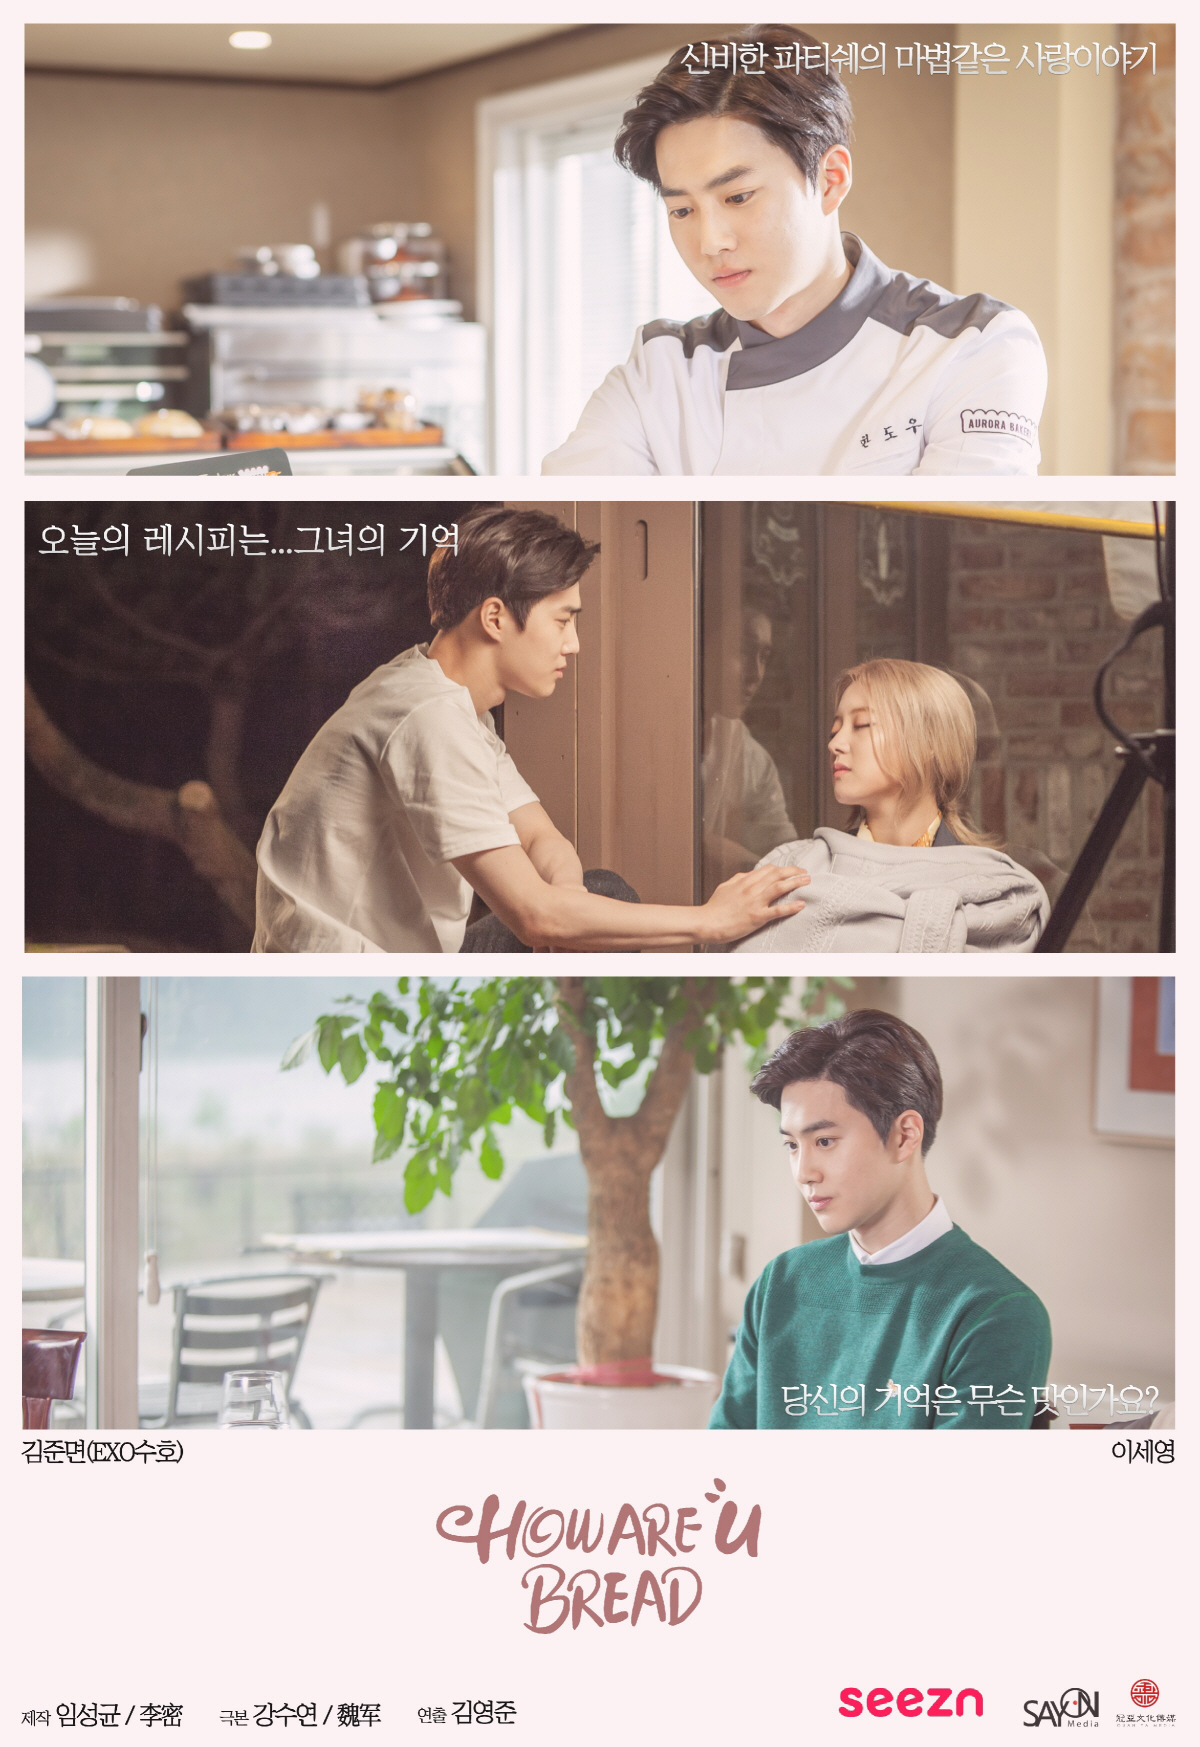 WebDrama How Are You Bread starring EXO Suho and Lee Se-young released the poster and confirmed the broadcast schedule.How Are You Bread is a baking-holic fantasy romance drama by Fatishé Handoou, a secret genius who makes bread that listens to wishes every morning, and the entertainment professional writer Lee Se-young, who infiltrates the bakery to get him in.The poster released by the production company Seion Media shows Suho transforming into a beautiful party and looking at actor Lee Se-young, and the curiosity about the romance of Alconut is growing.In addition to Suho and Lee Se-young, Seo Jung-yeon, who appeared in Drama Beauty Sister who buys rice well and Dawn of the Sun, is a hysterical entertainment PD station in perfectionism. In addition to Drama Mokdu Flower, Lee Ki-chan is actively performing in addition to the entertainment activities.How Are You Bread, which will be released from Seizon (SEEZN) on the 17th, is a Korean-Chinese joint venture drama in which Chinese media participated in investment and production, and it is expected that it will be a signal to thaw cultural exchanges between the two countries.